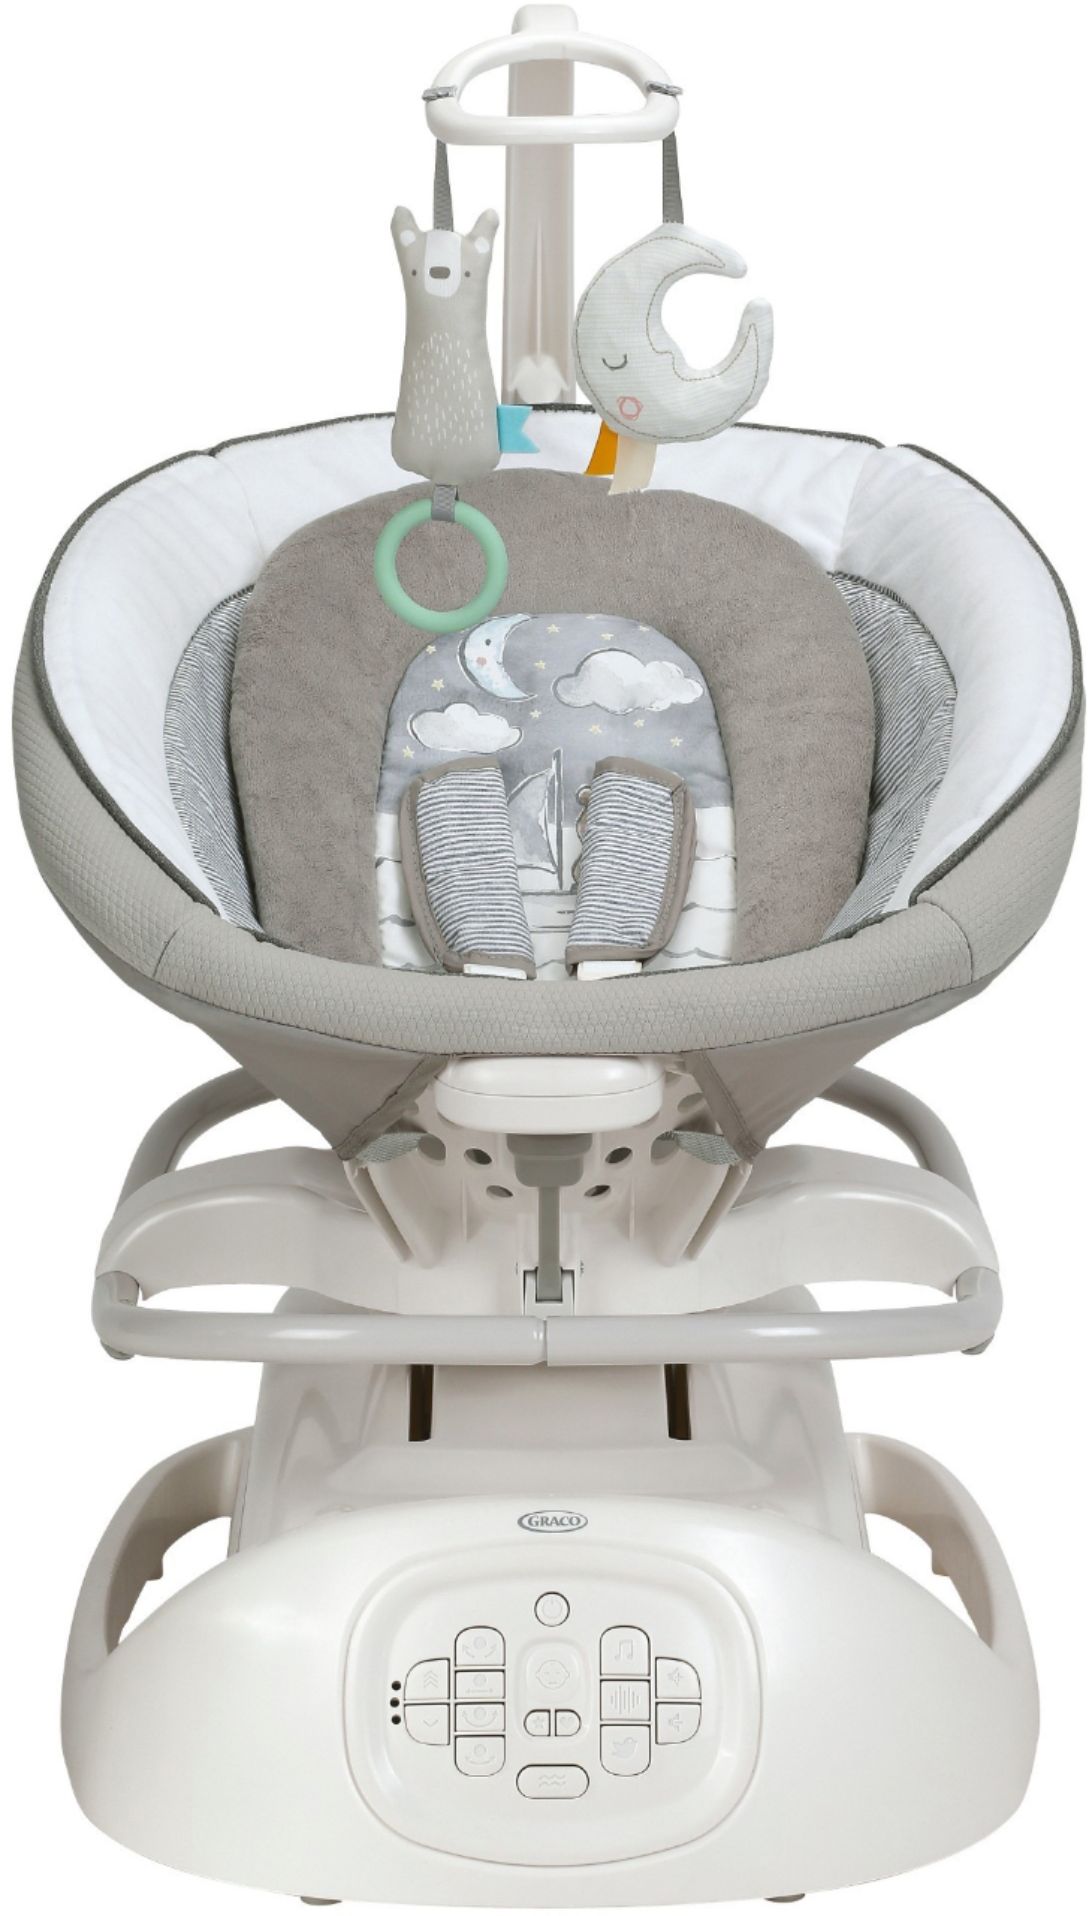 Graco Sense2Soothe Swing with Cry Detection Technology Birdie 